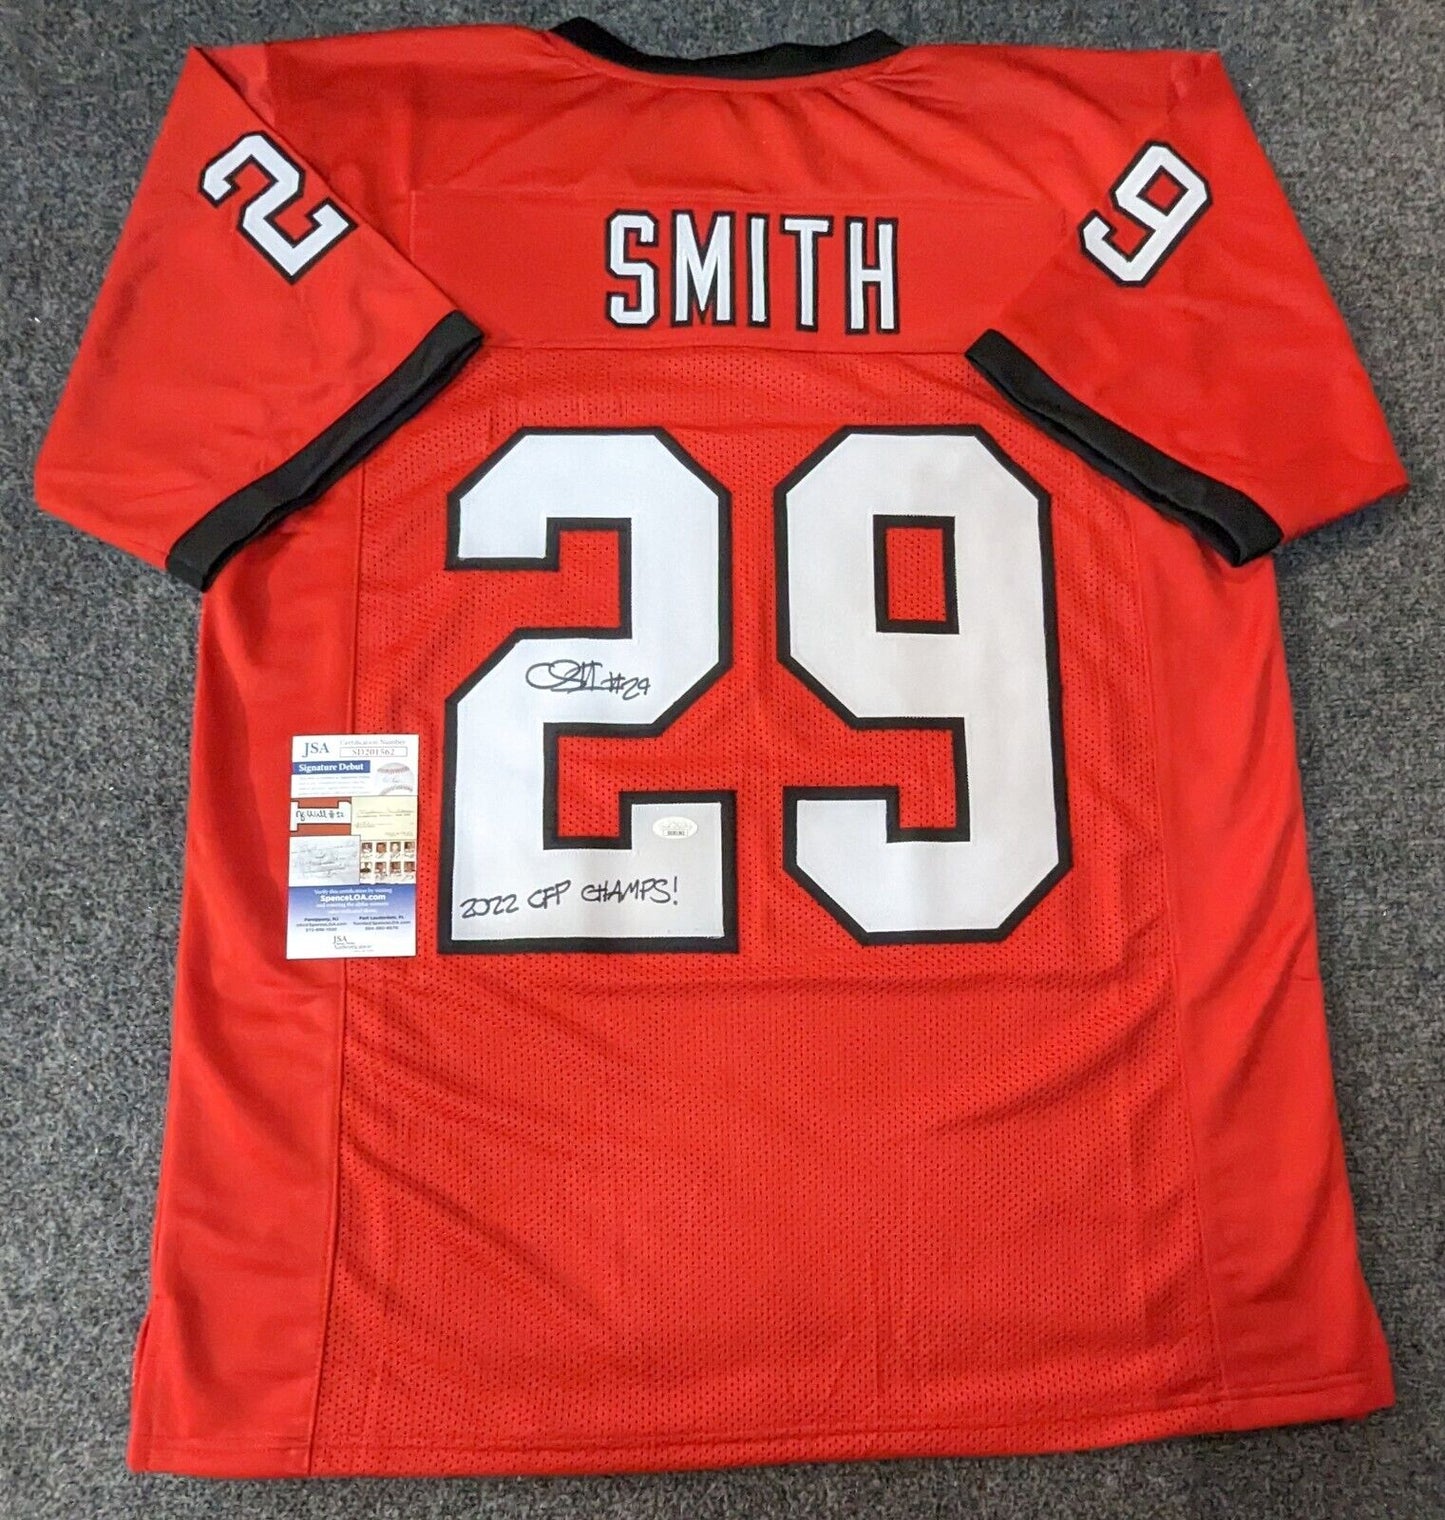 MVP Authentics Georgia Bulldogs Christopher Smith Autographed Signed Inscribed Jersey Jsa Coa 144 sports jersey framing , jersey framing